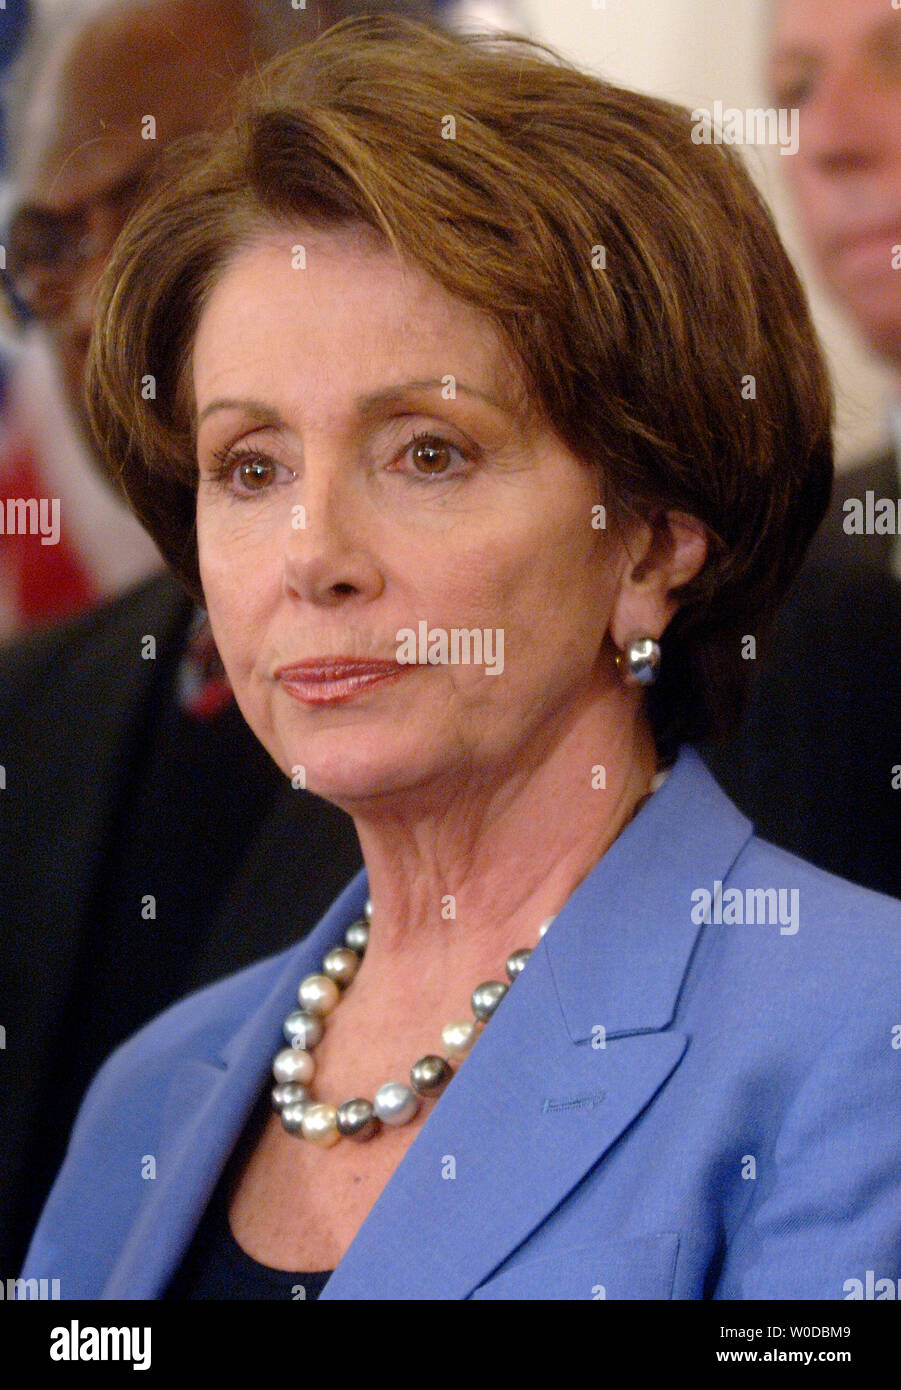 Speaker of the House Nancy Pelosi (D-CA) speaks at a press conference marking the first 100 legislative hours of the new Congress, in Washington on January 18, 2007. (UPI Photo/Kevin Dietsch) Stock Photo